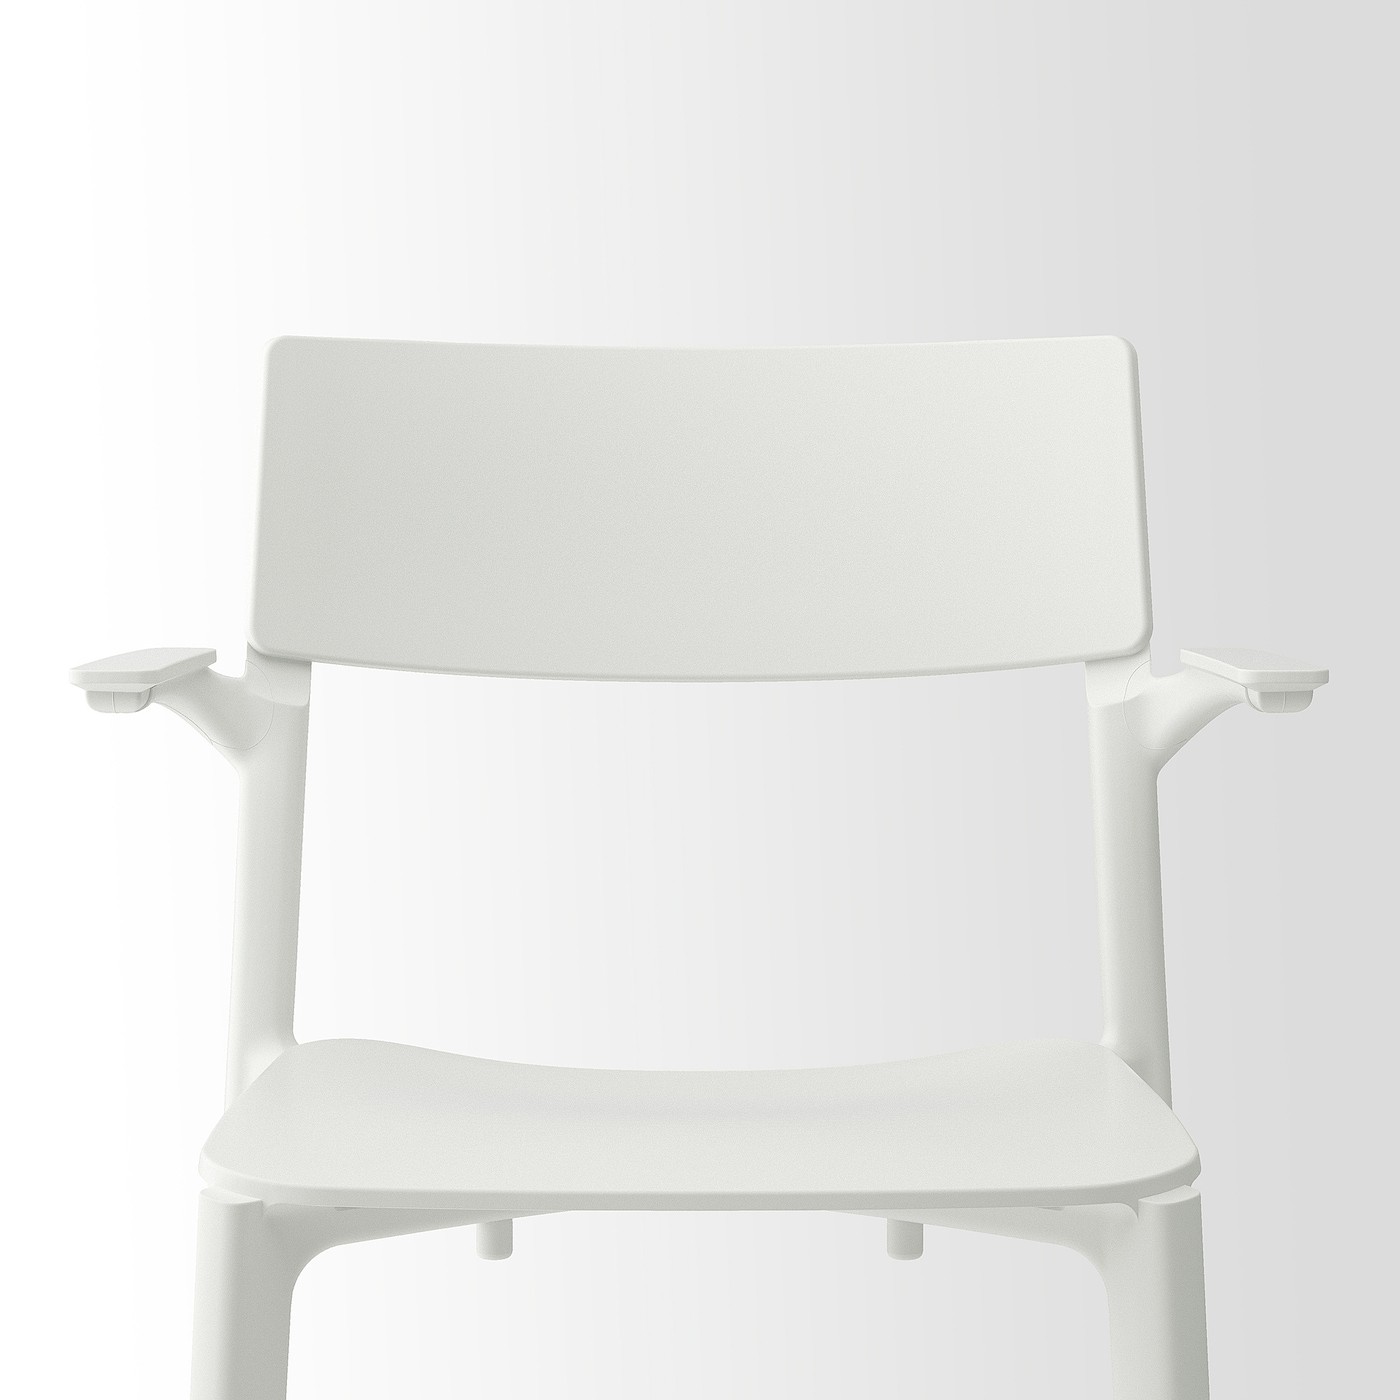 JANINGE Chair with armrests